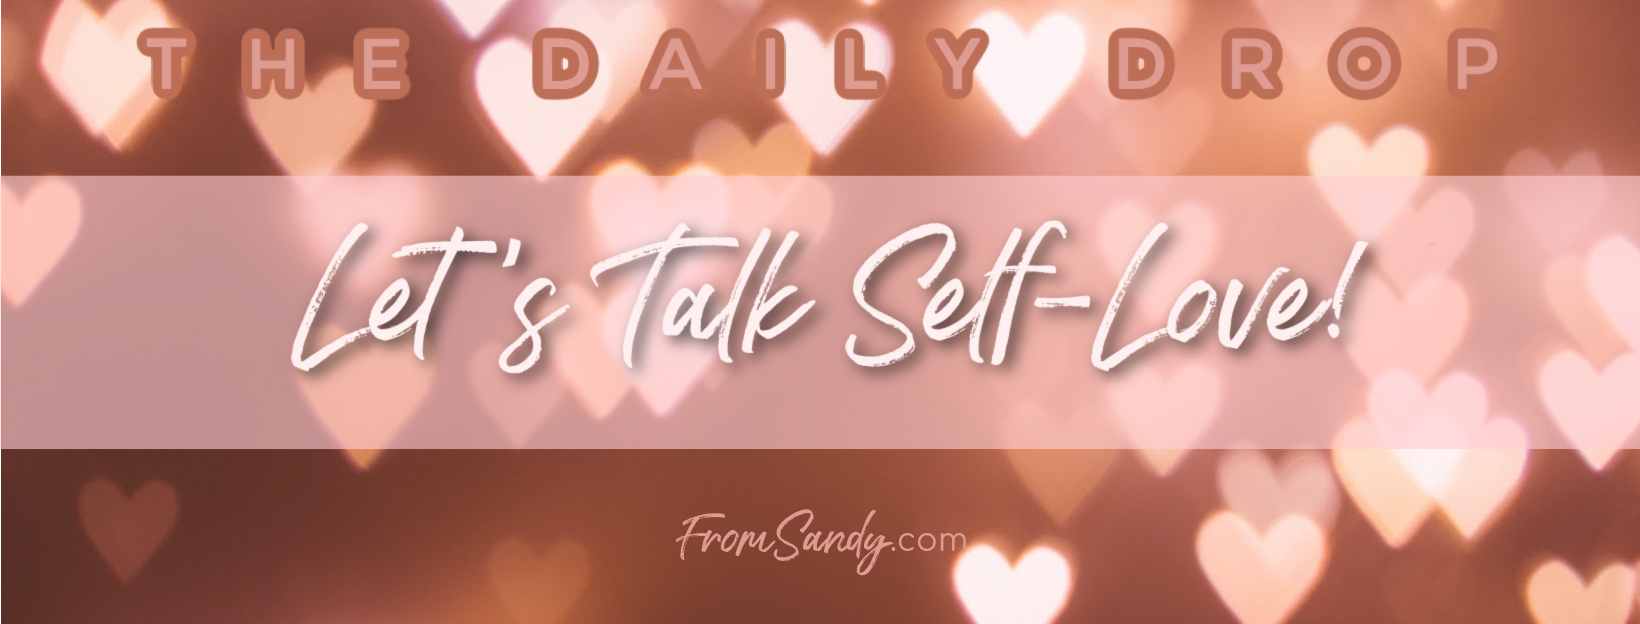 Let’s Talk Self-Love!, From Sandy